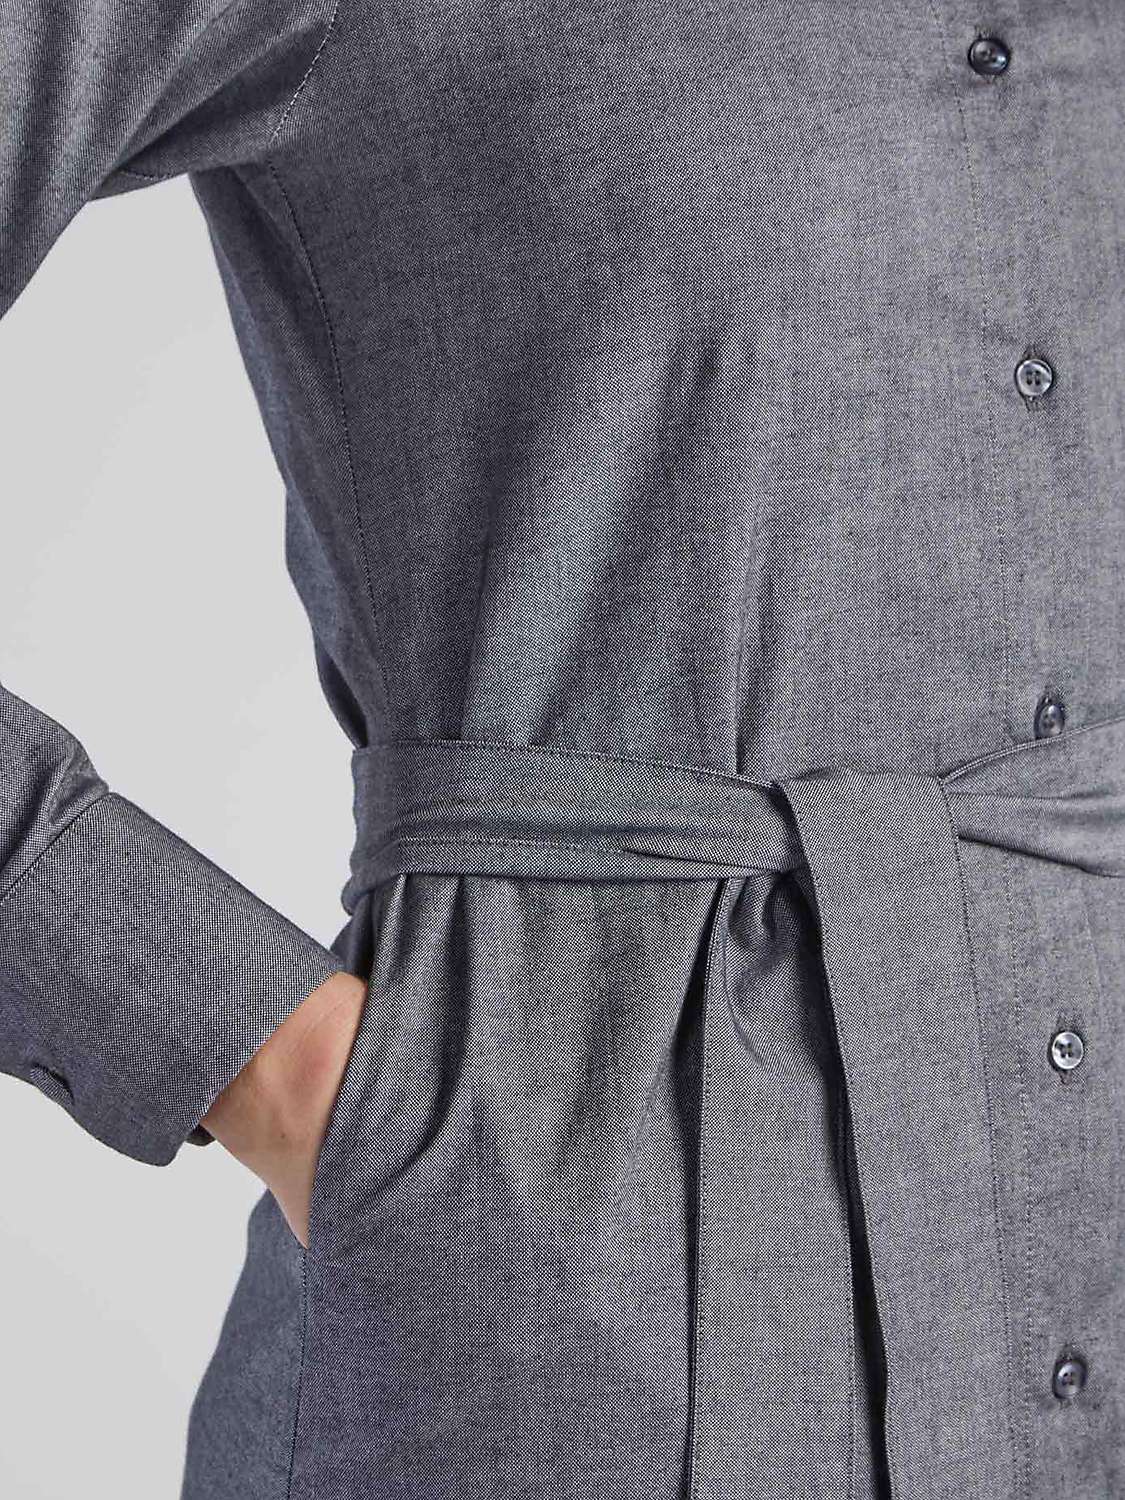 Buy Aab Structured Cotton Midi Shirt Dress, Mid Grey Online at johnlewis.com